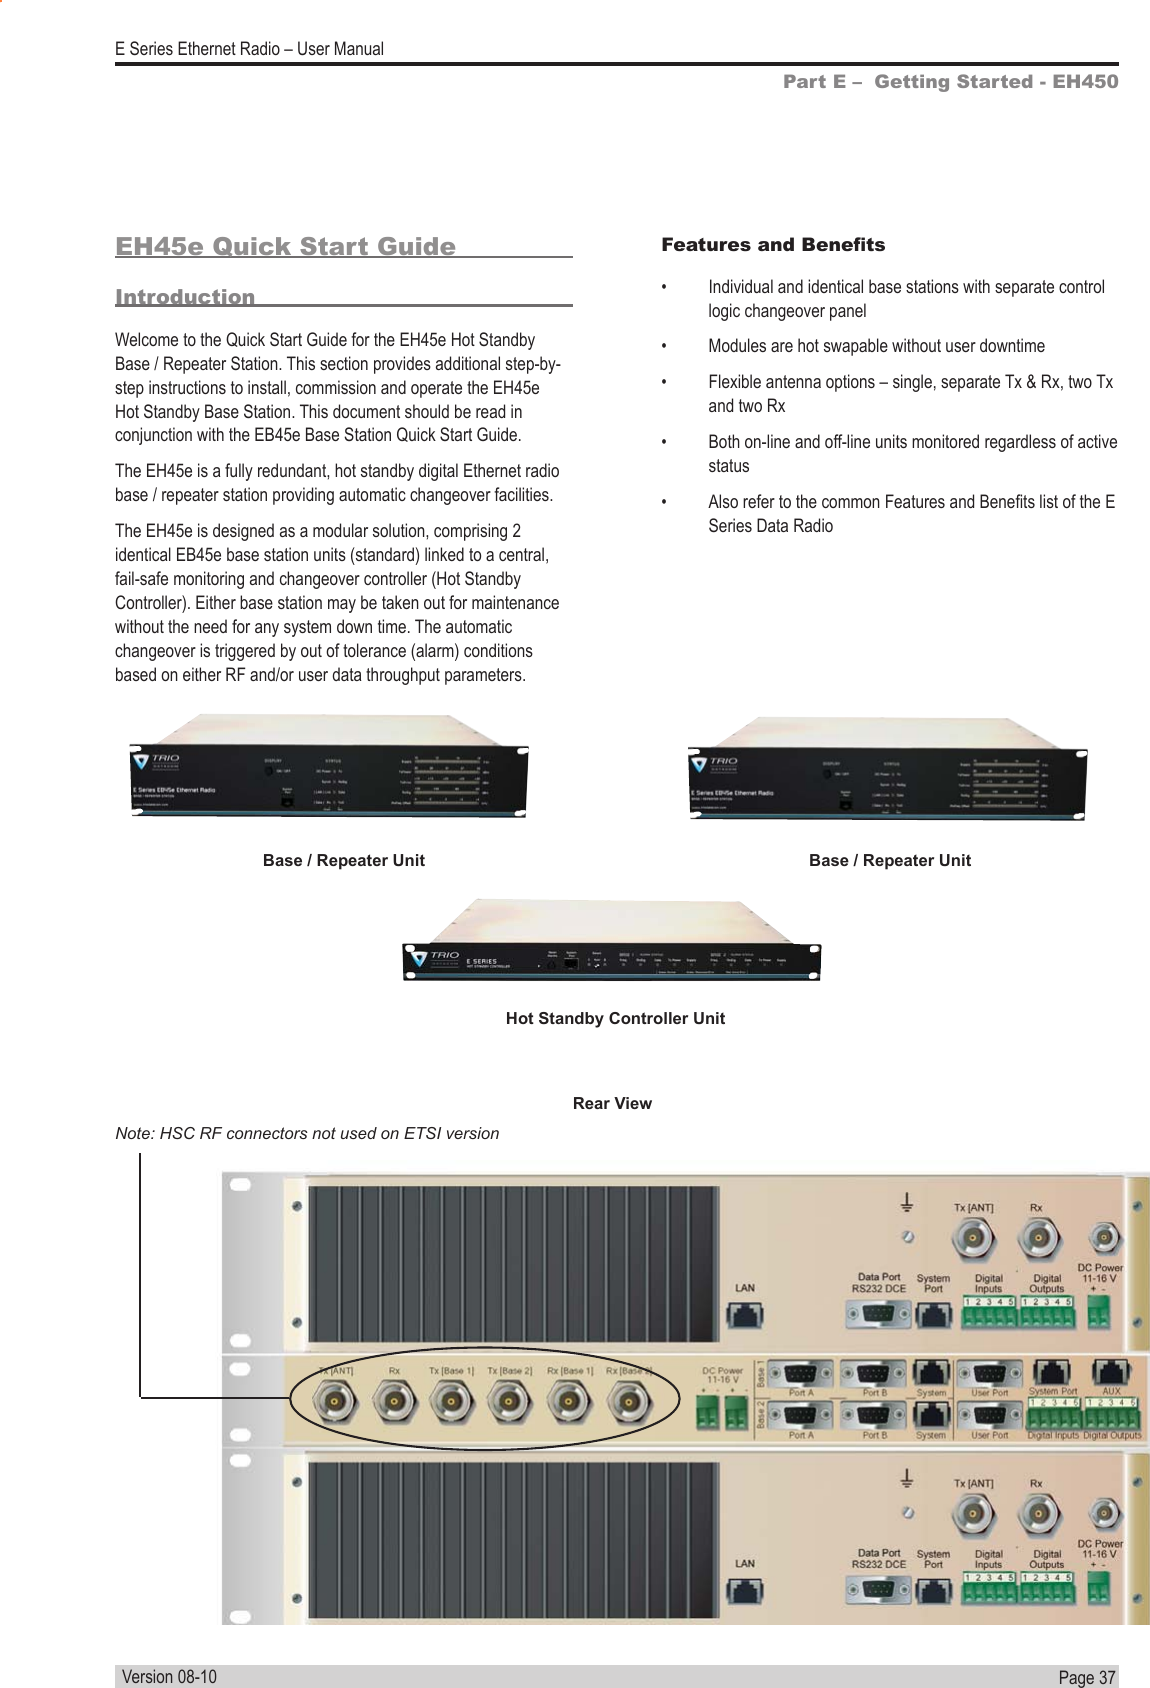 Page  37  E Series Ethernet Radio – User ManualVersion 08-10EH45e Quick Start GuideIntroductionWelcome to the Quick Start Guide for the EH45e Hot Standby Base / Repeater Station. This section provides additional step-by-step instructions to install, commission and operate the EH45e Hot Standby Base Station. This document should be read in conjunction with the EB45e Base Station Quick Start Guide.The EH45e is a fully redundant, hot standby digital Ethernet radio base / repeater station providing automatic changeover facilities. The EH45e is designed as a modular solution, comprising 2 identical EB45e base station units (standard) linked to a central, fail-safe monitoring and changeover controller (Hot Standby Controller). Either base station may be taken out for maintenance without the need for any system down time. The automatic changeover is triggered by out of tolerance (alarm) conditions based on either RF and/or user data throughput parameters.Part E –  Getting Started - EH450Features and Benets•  Individual and identical base stations with separate control logic changeover panel•  Modules are hot swapable without user downtime•  Flexible antenna options – single, separate Tx &amp; Rx, two Tx and two Rx•  Both on-line and off-line units monitored regardless of active status•  Also refer to the common Features and Benets list of the E Series Data RadioBase / Repeater UnitHot Standby Controller UnitBase / Repeater UnitNote: HSC RF connectors not used on ETSI versionRear View